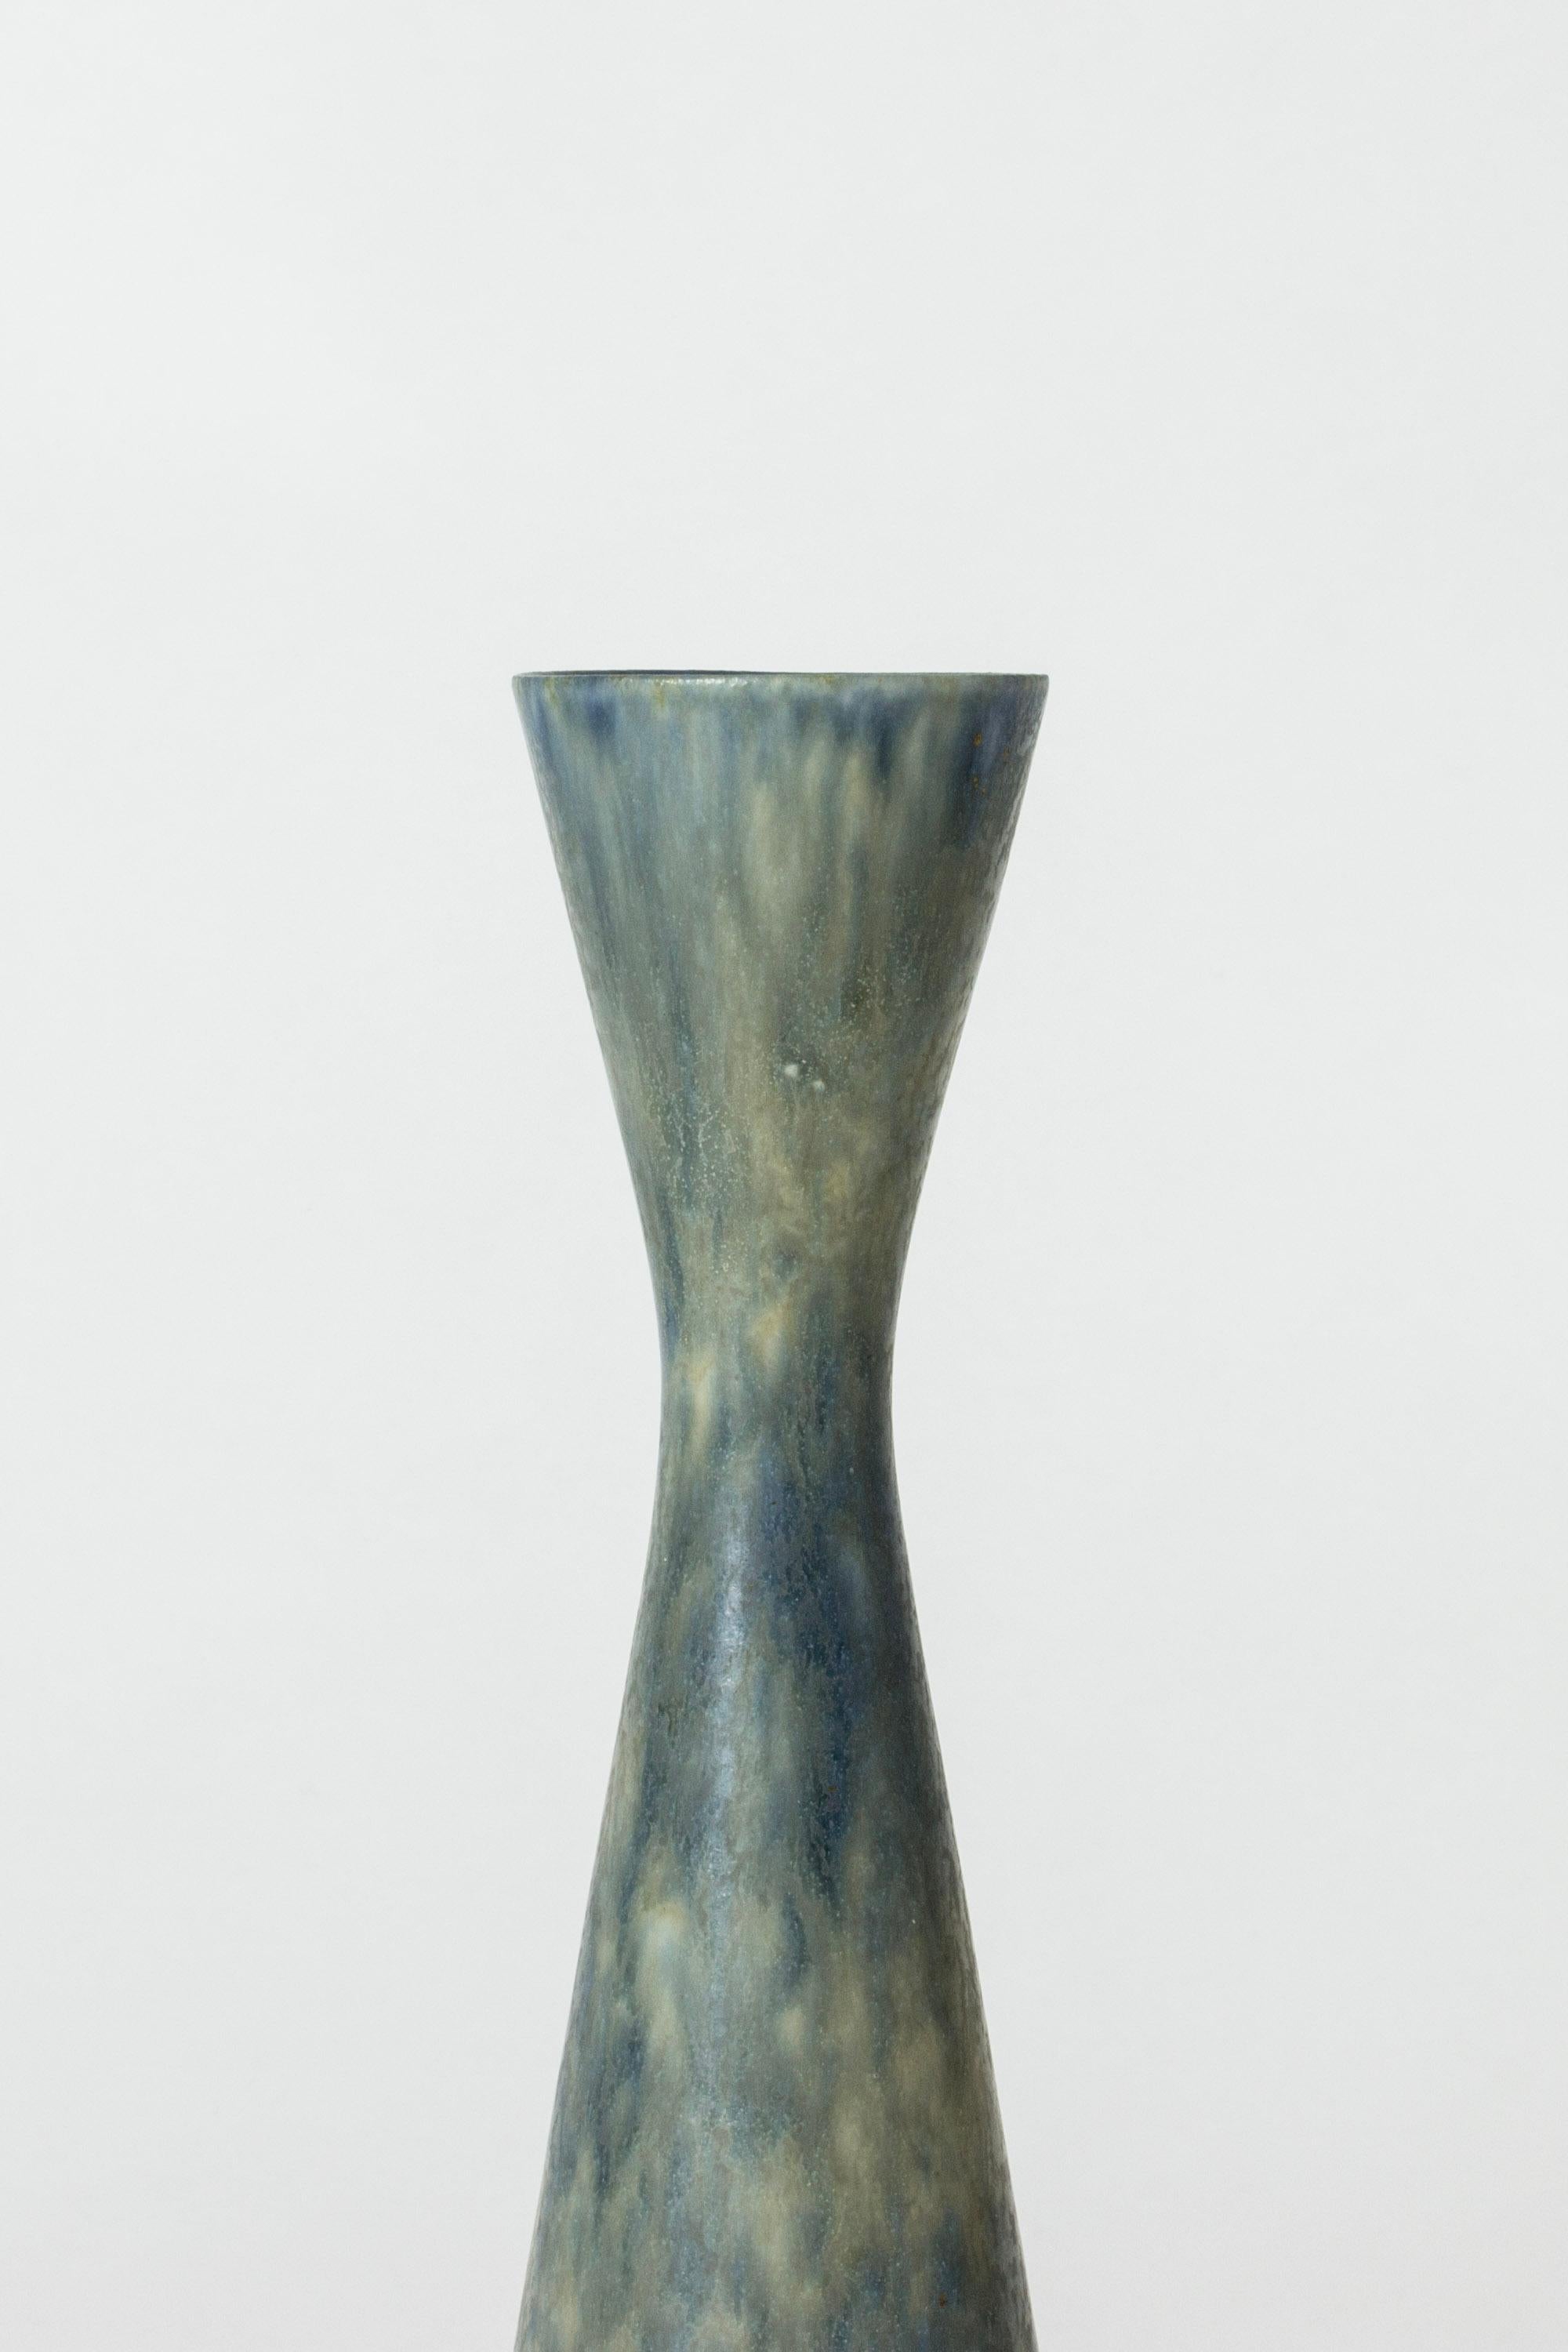 Cool stoneware vase by Carl-Harry Stålhane in a sleek form. Thick blue glazes blends with yellow tones.

Carl-Harry Stålhane was one of the stars among Swedish ceramic artists during the 1950s, 1960s and 1970s, whose designs are just as highly